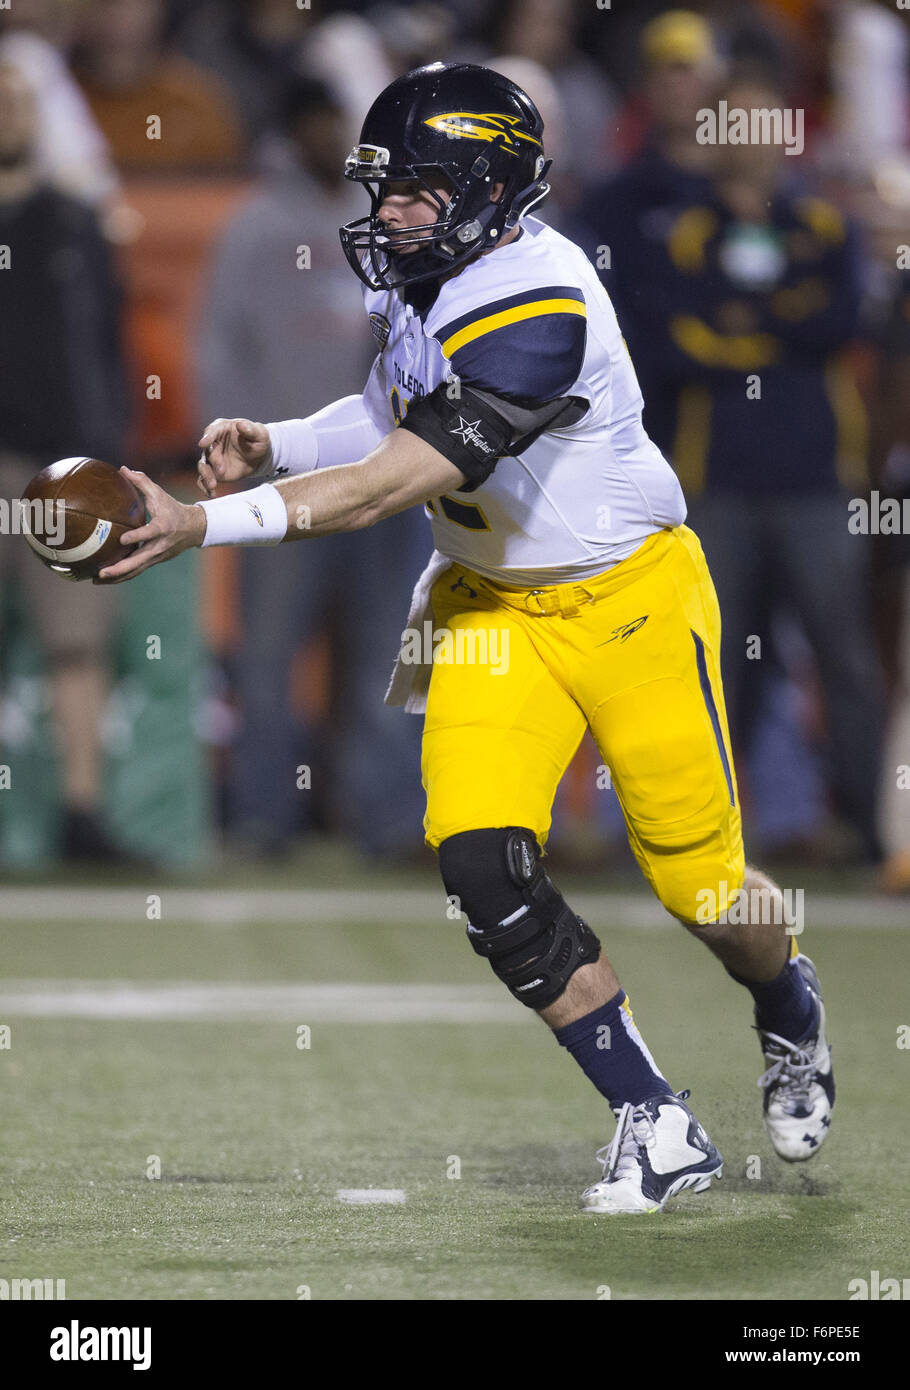 Bowling Green, Ohio, USA. 17th Nov, 2015. Toledo quarterback Phillip Ely (12) hands the ball off during NCAA football game action between the Toledo Rockets and the Bowling Green Falcons at Doyt L. Perry Stadium in Bowling Green, Ohio. Toledo defeated Bowling Green 44-28. John Mersits/CSM/Alamy Live News Stock Photo